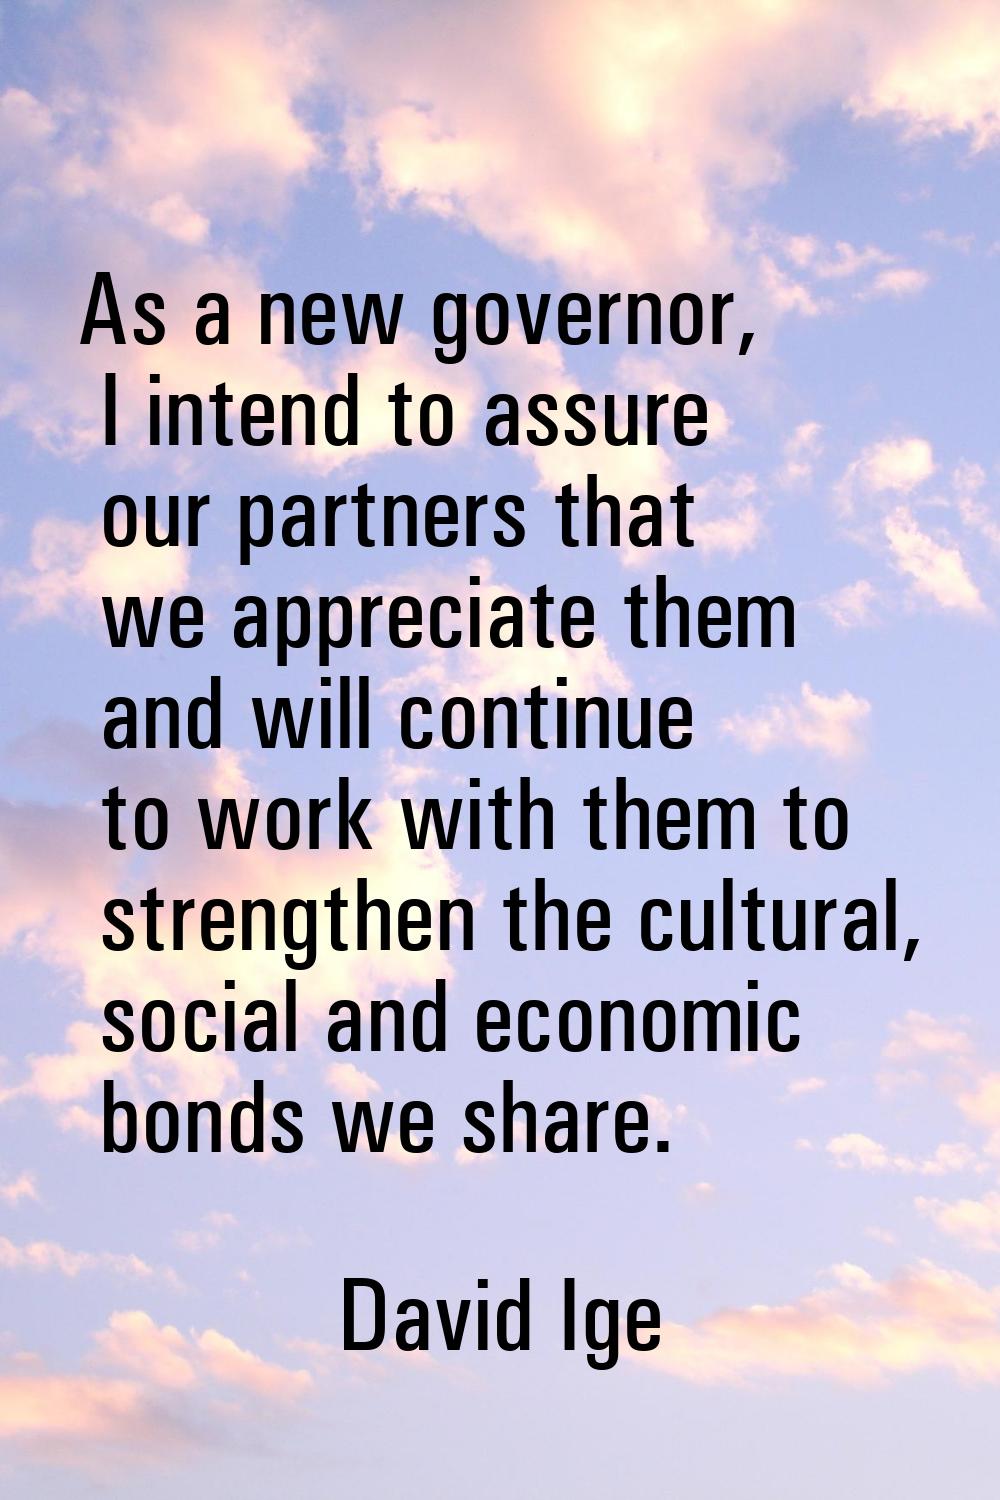 As a new governor, I intend to assure our partners that we appreciate them and will continue to wor